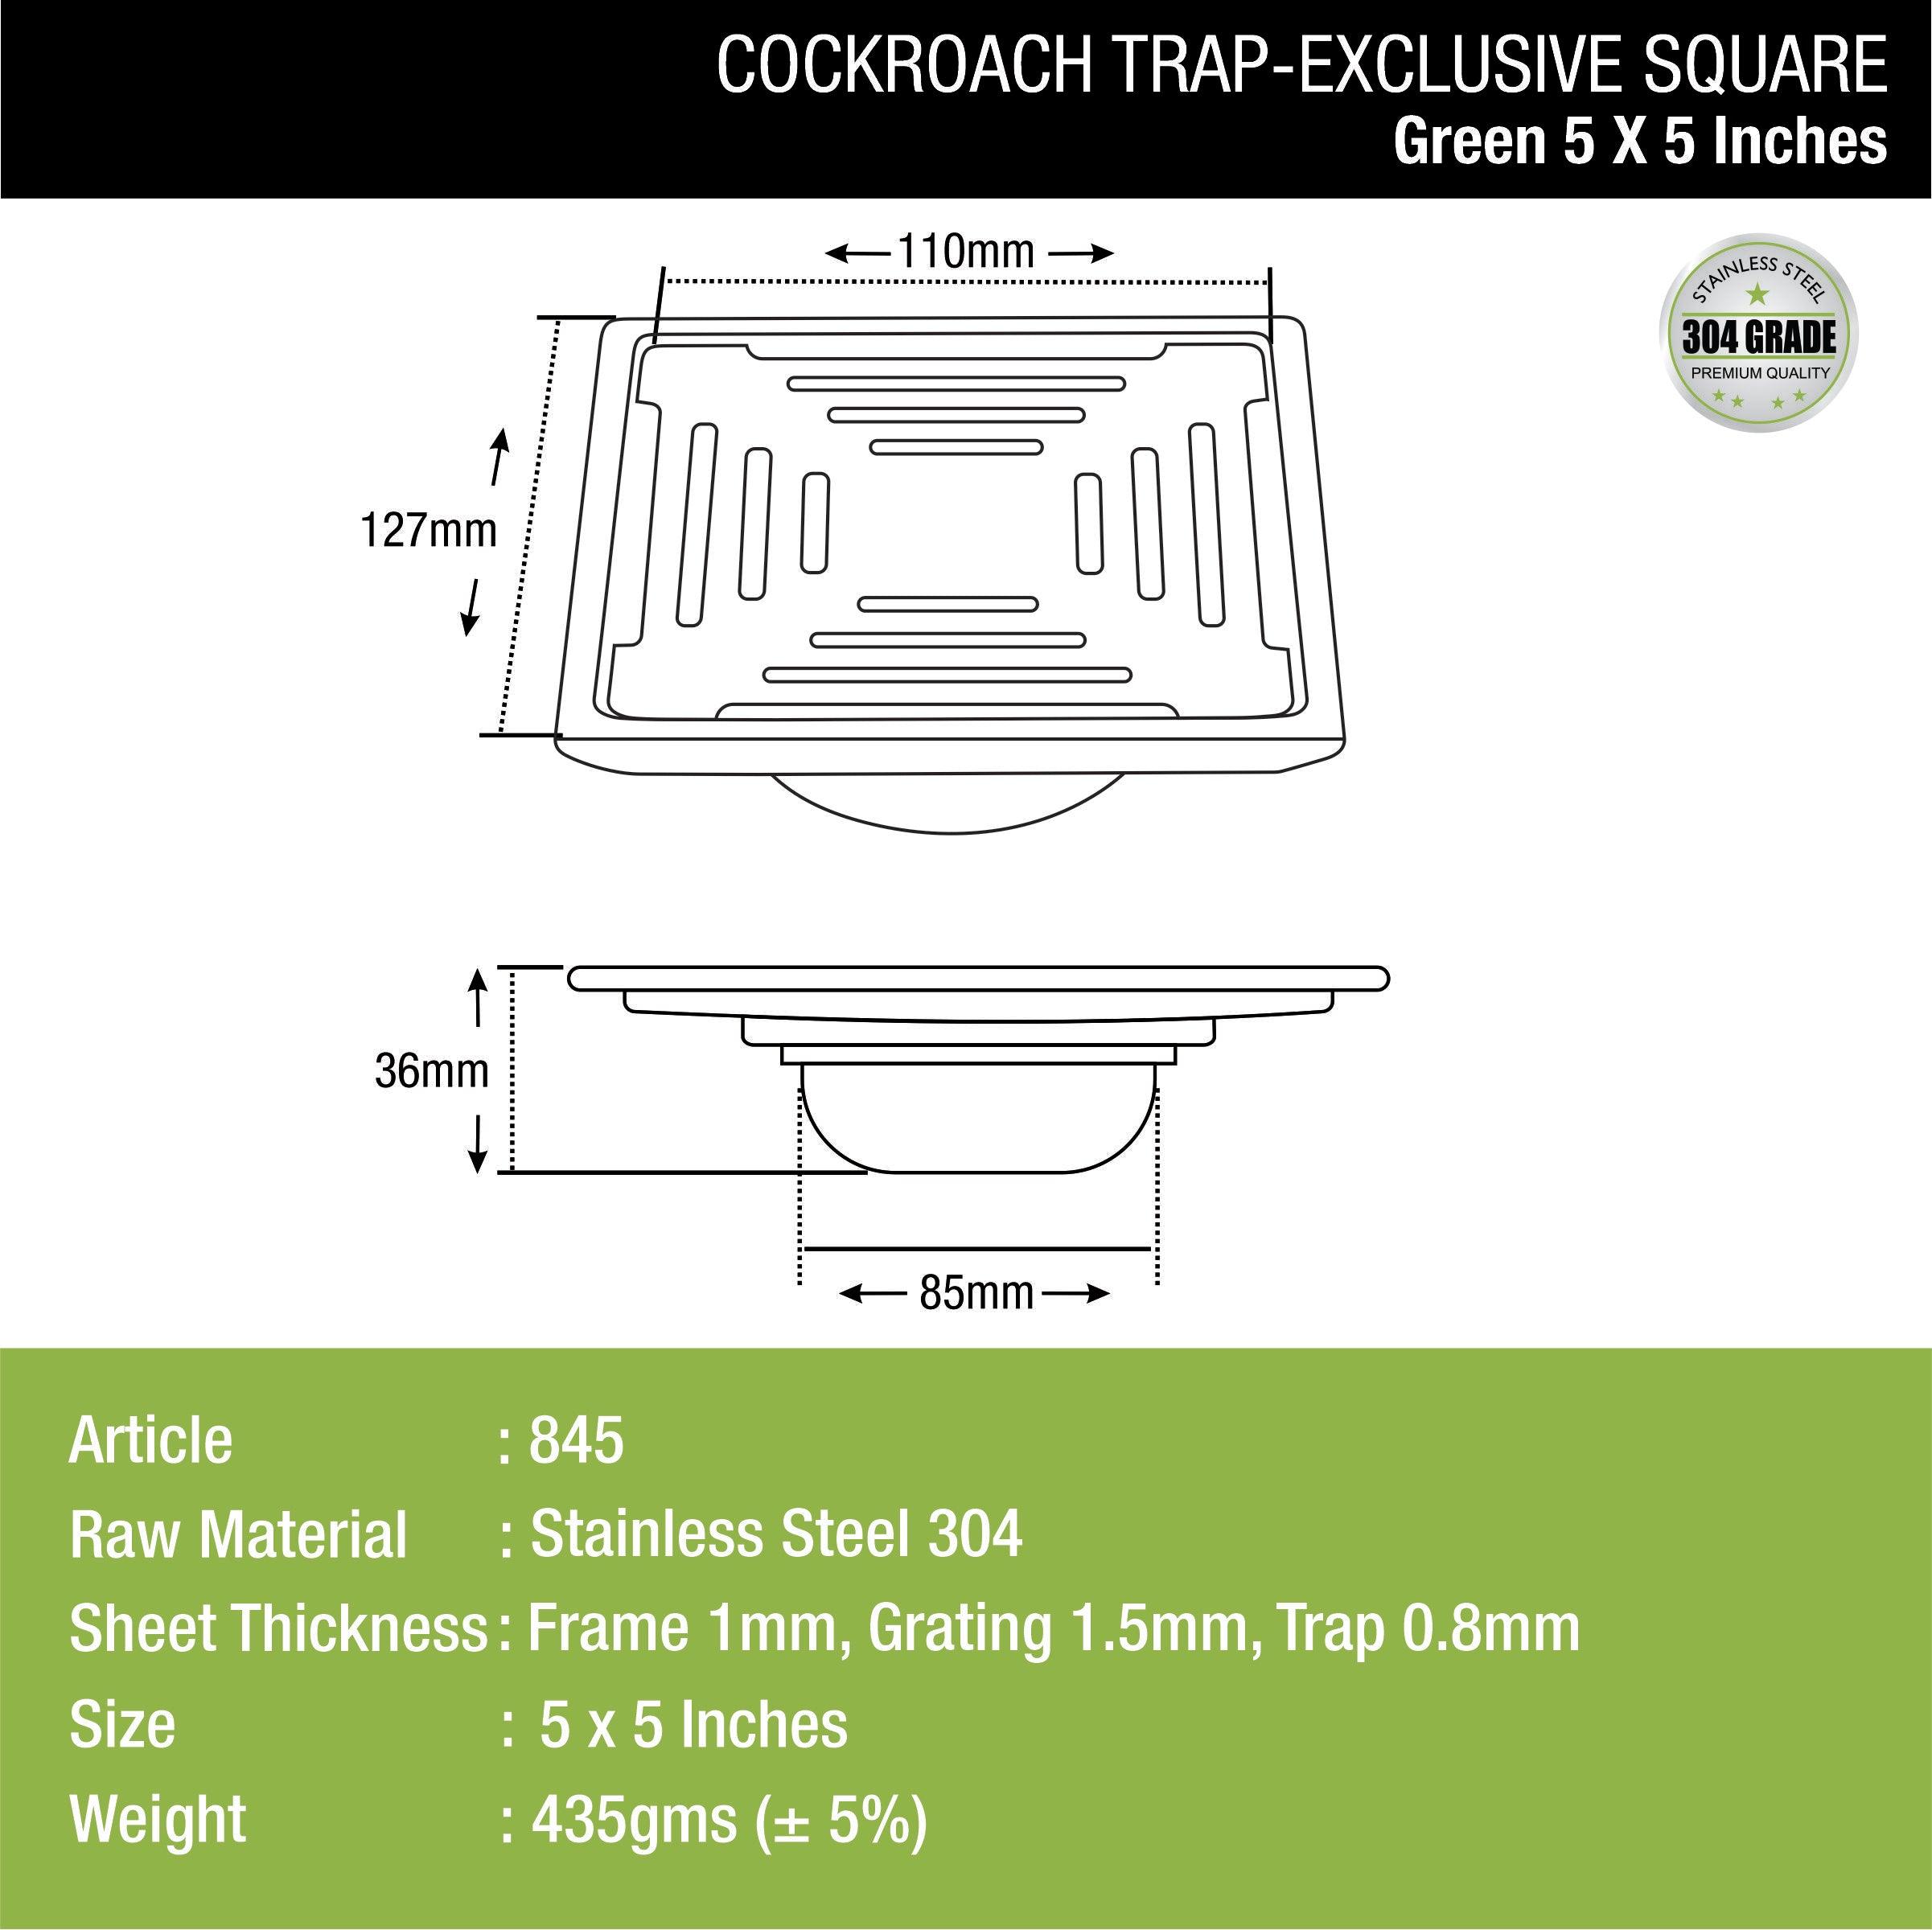 Green Exclusive Square Floor Drain (5 x 5 Inches) with Cockroach Trap dimensions and sizes